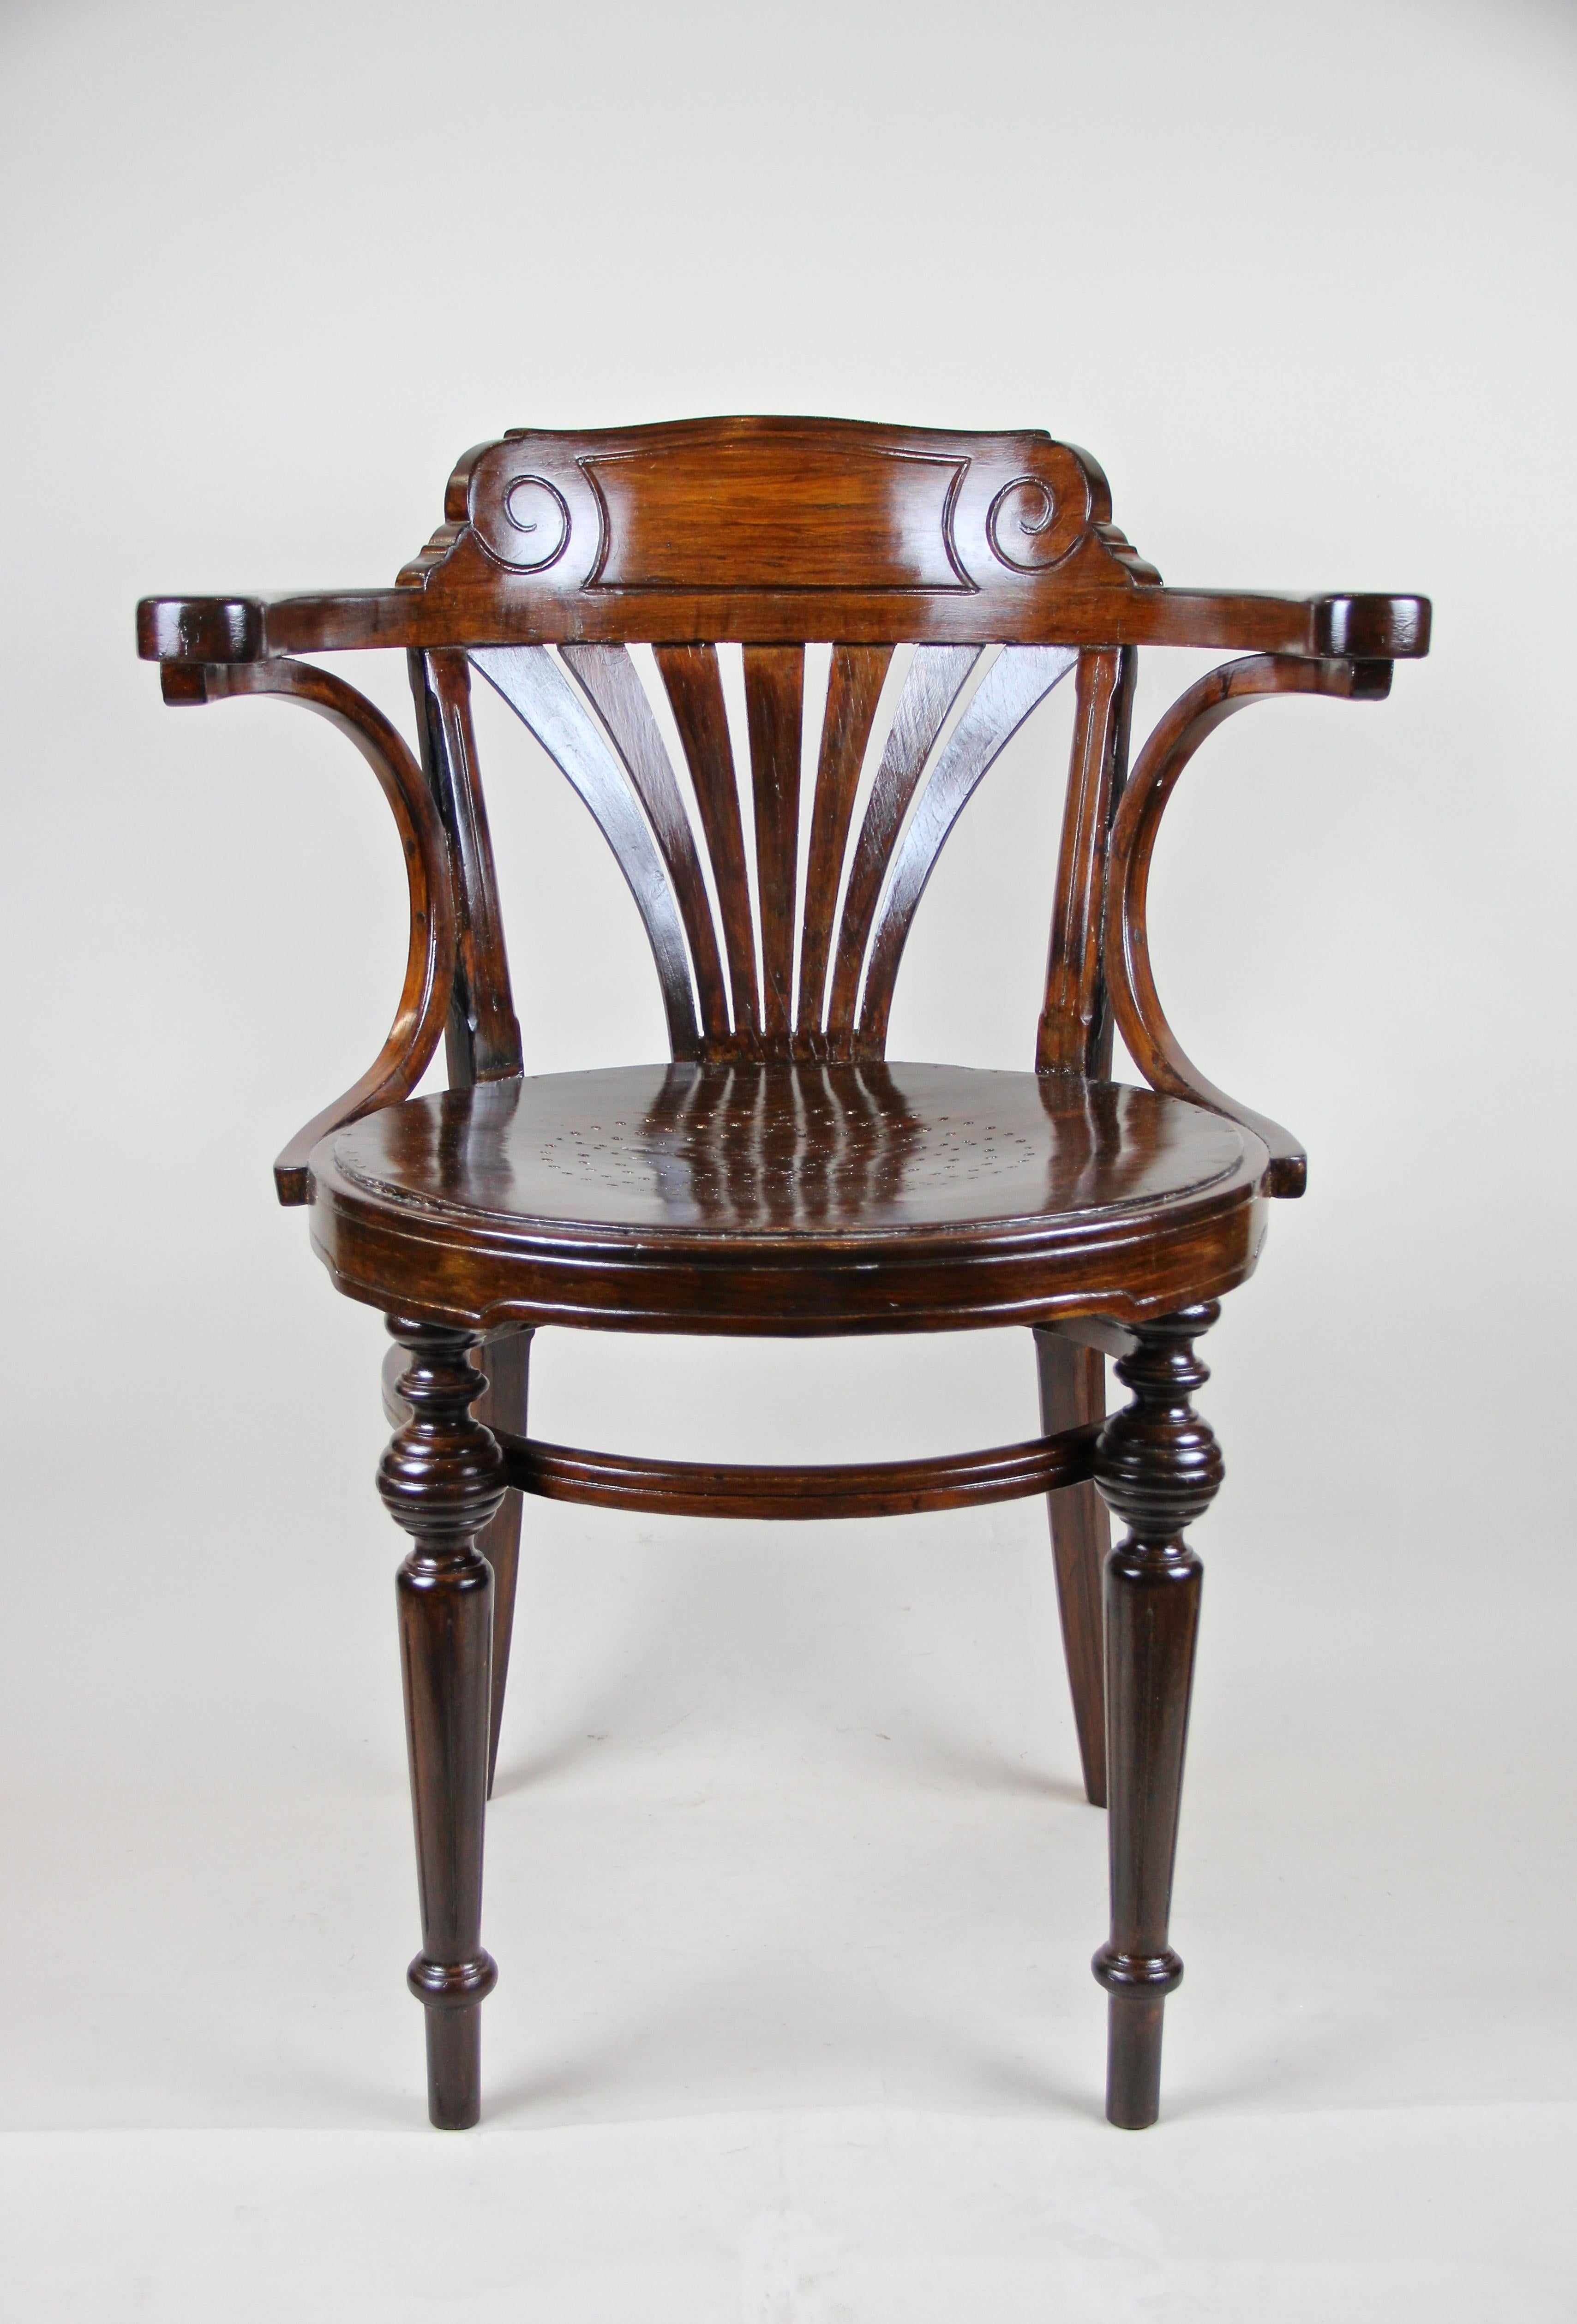 Beautifully restored rare Thonet Armchair from Austria, circa 1890. Made of bentwood, typical for these items, the round seat of this early Thonet chair is adorned by a great perforated star design. The wonderful carved backrest is highlighted by a